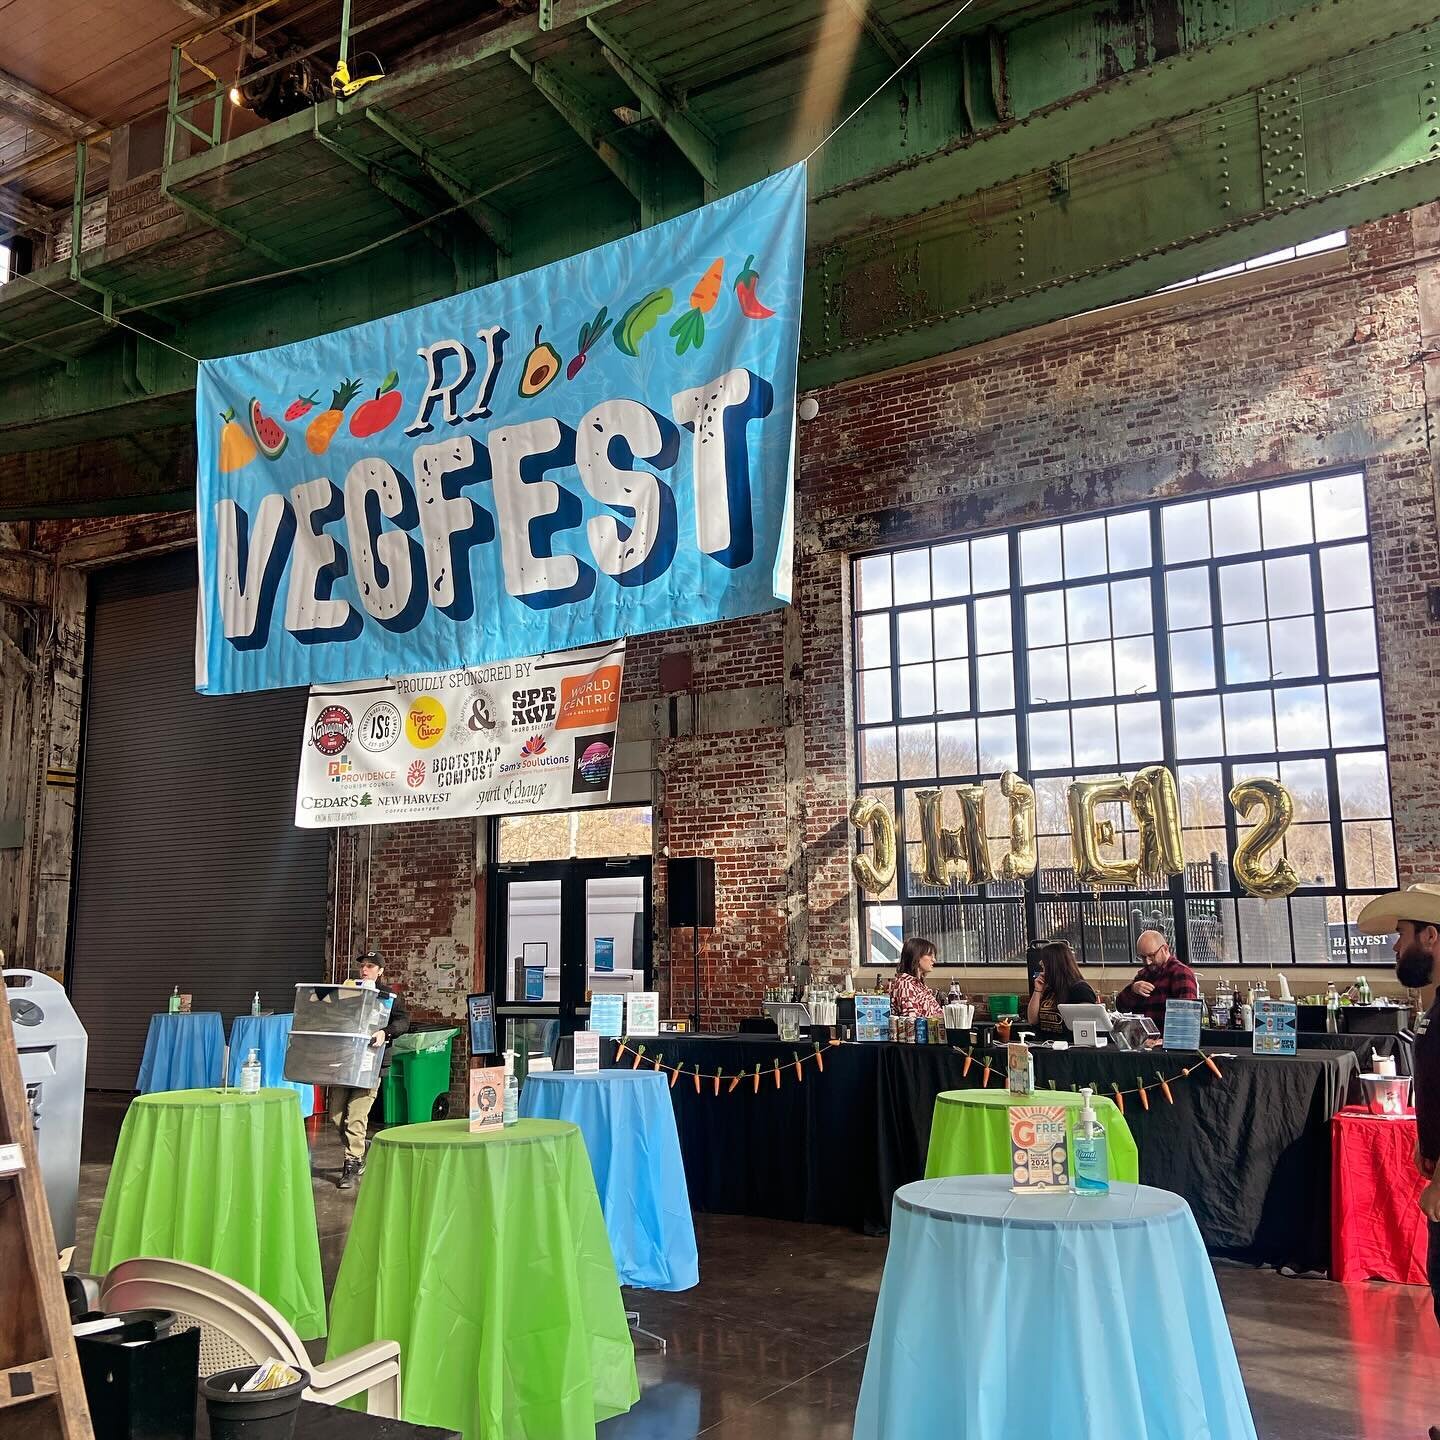 Hello Rhode Island! We&rsquo;re excited to be participating in @rivegfest this weekend! Hopefully some of you amazing people got tickets&mdash;a weekend full of tasty food, drinks, snack &amp; samples, and super cool people!

#plantcurious